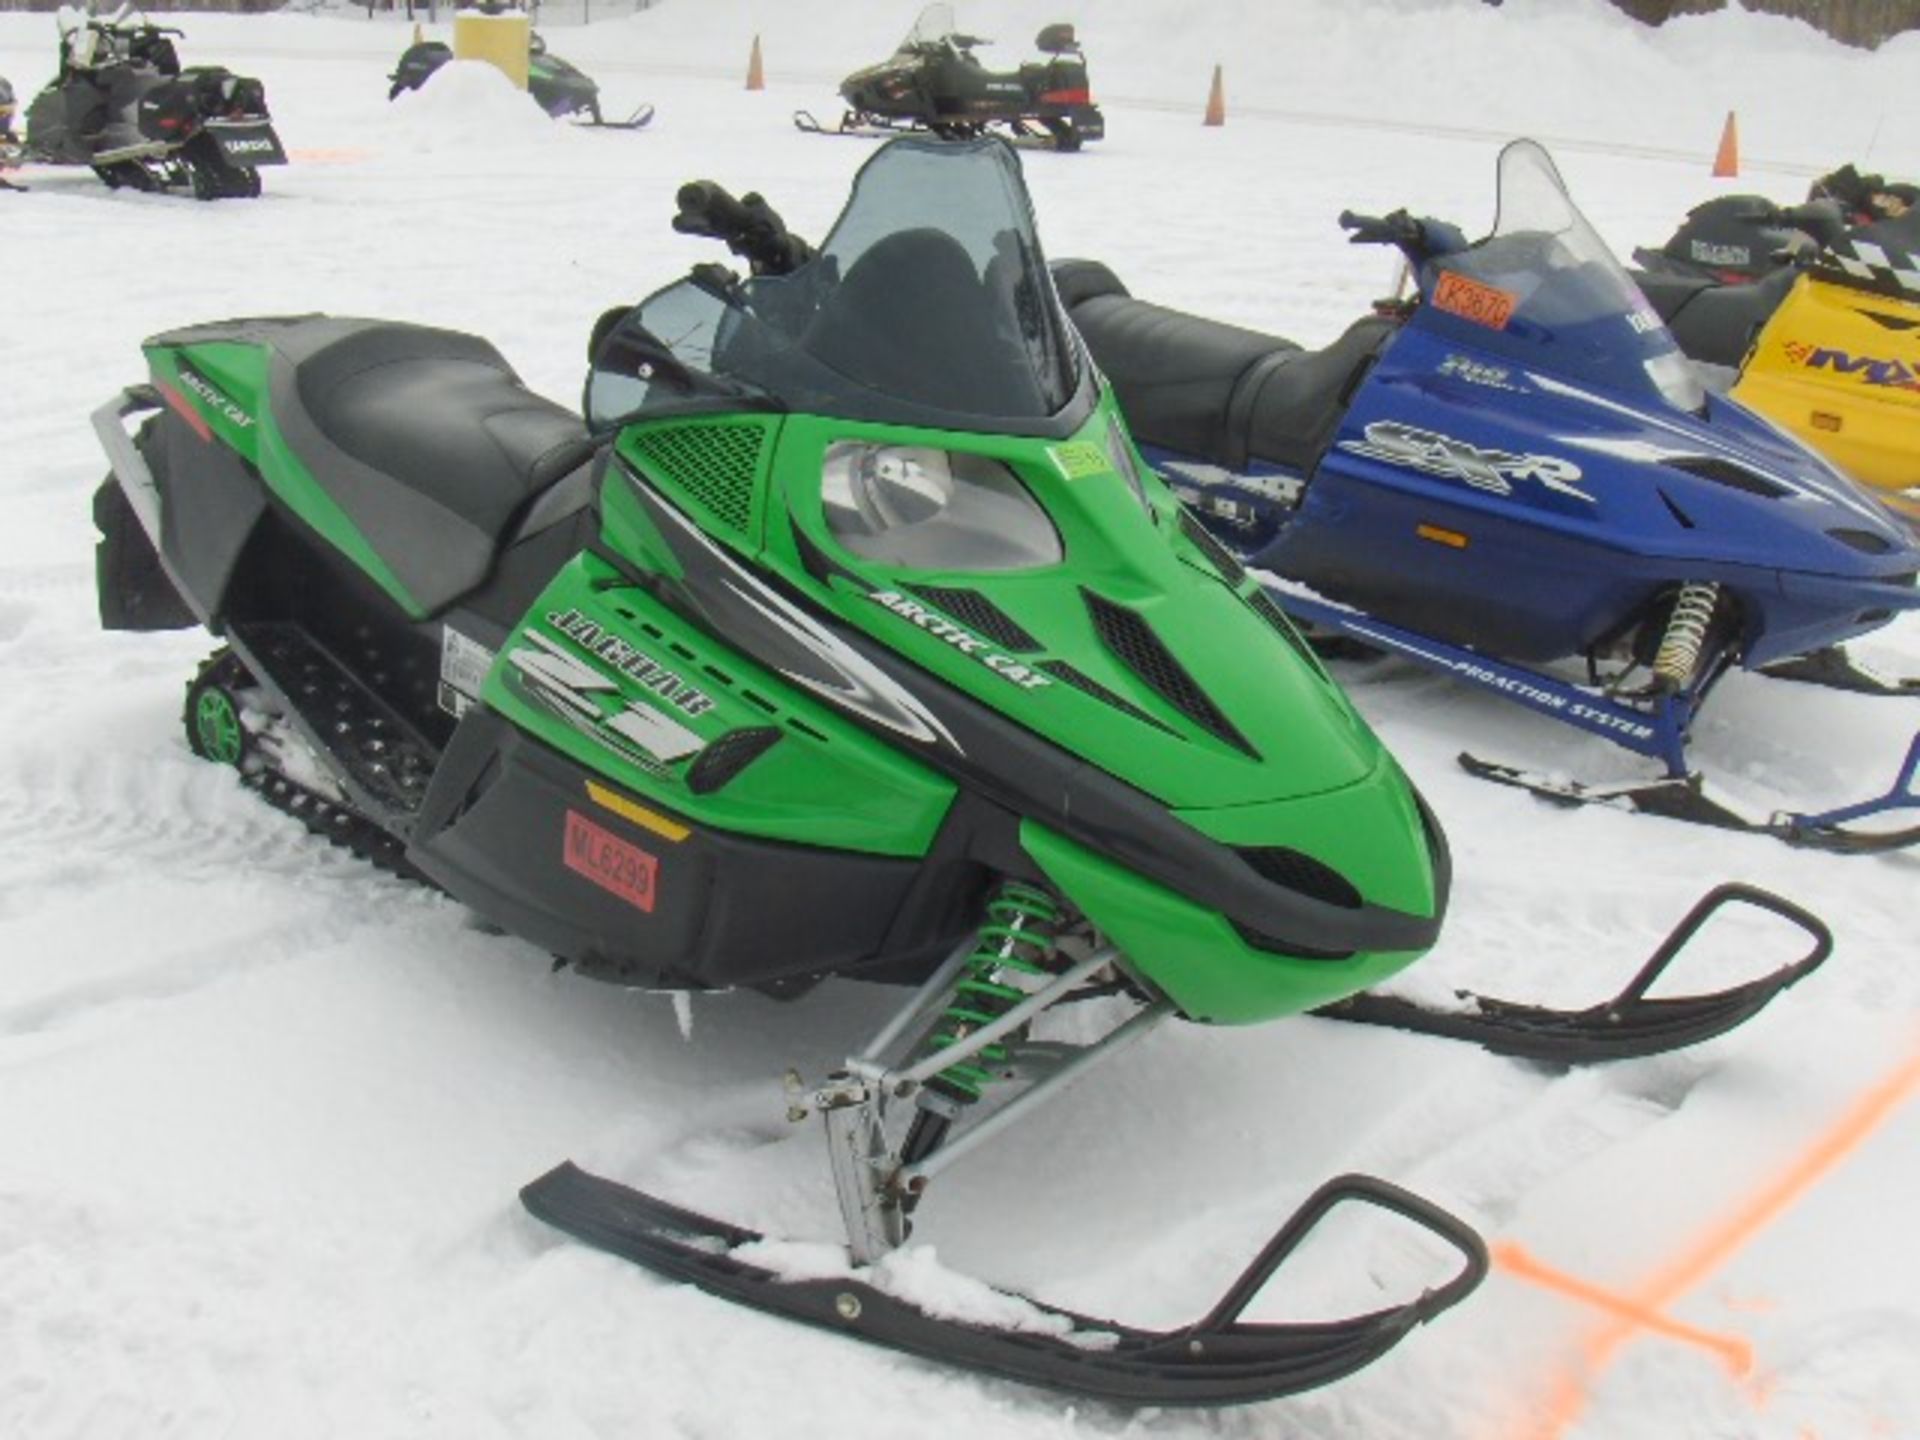 2007 ARCTIC CAT 1100 Z 1 JAGUAR  4UF07SNW77T115670 snowmobile, owner started at time of auction - Image 2 of 4